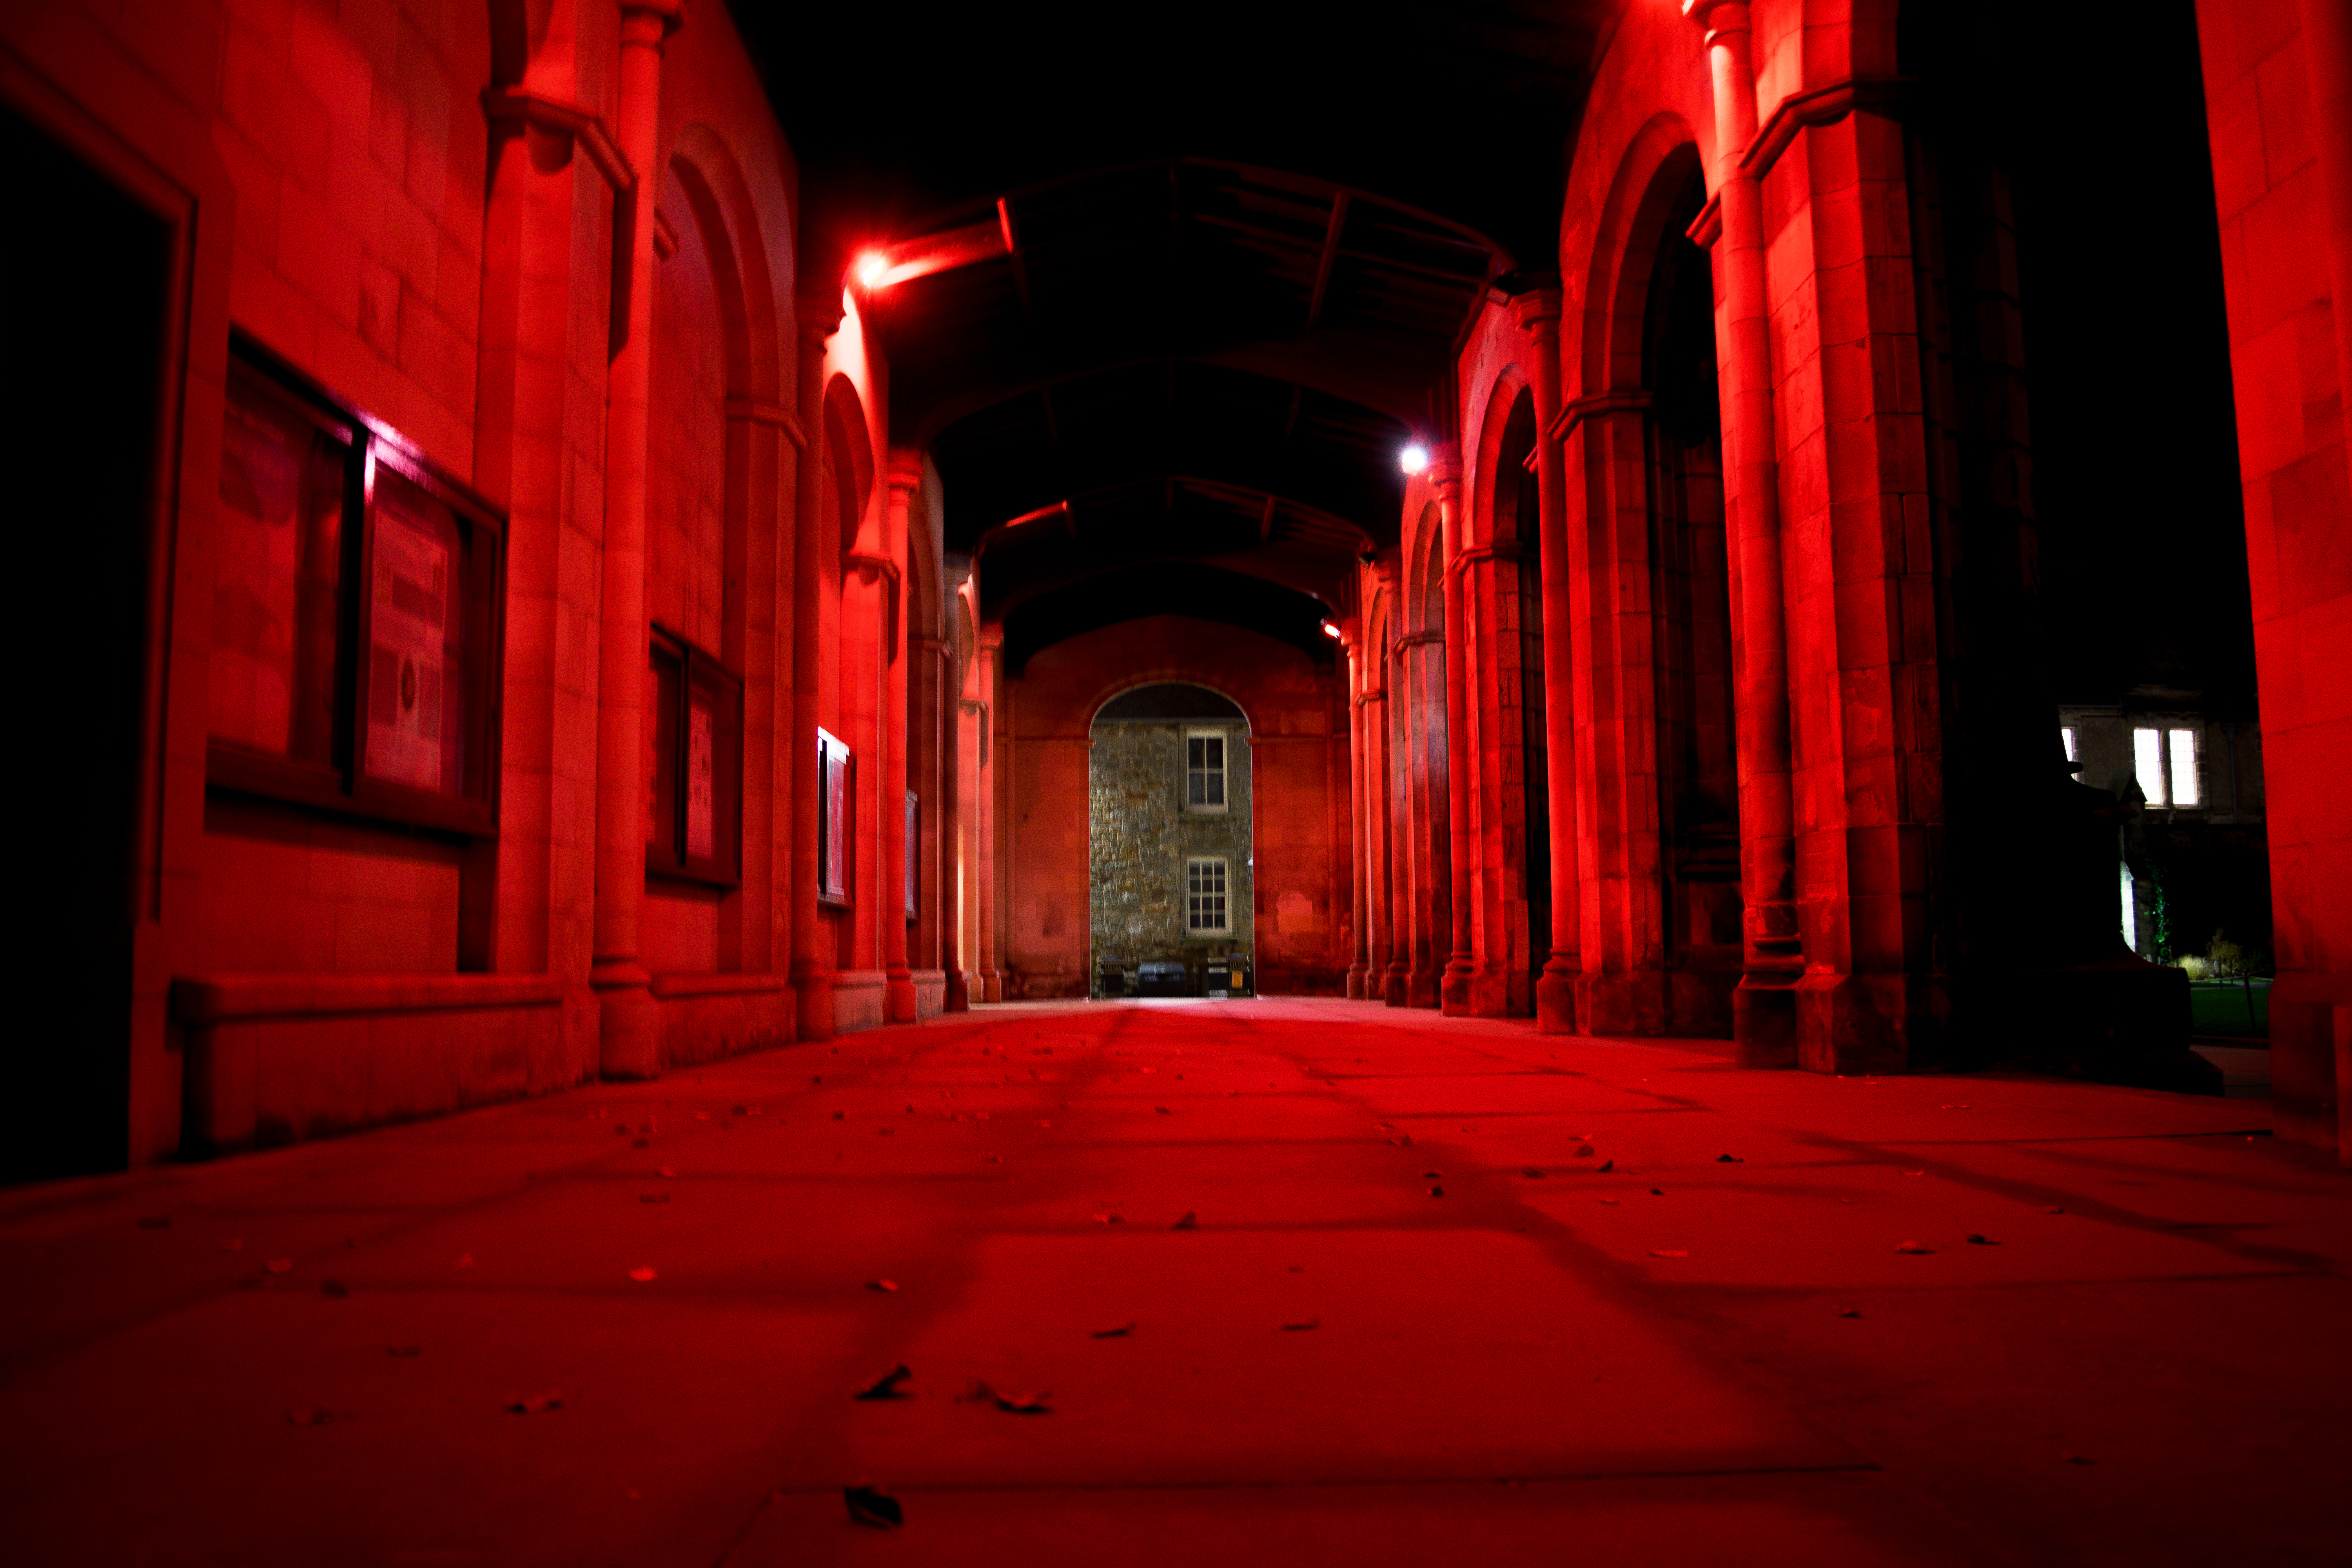 St Salvator's Quad has been lit up red to mark the centenary.